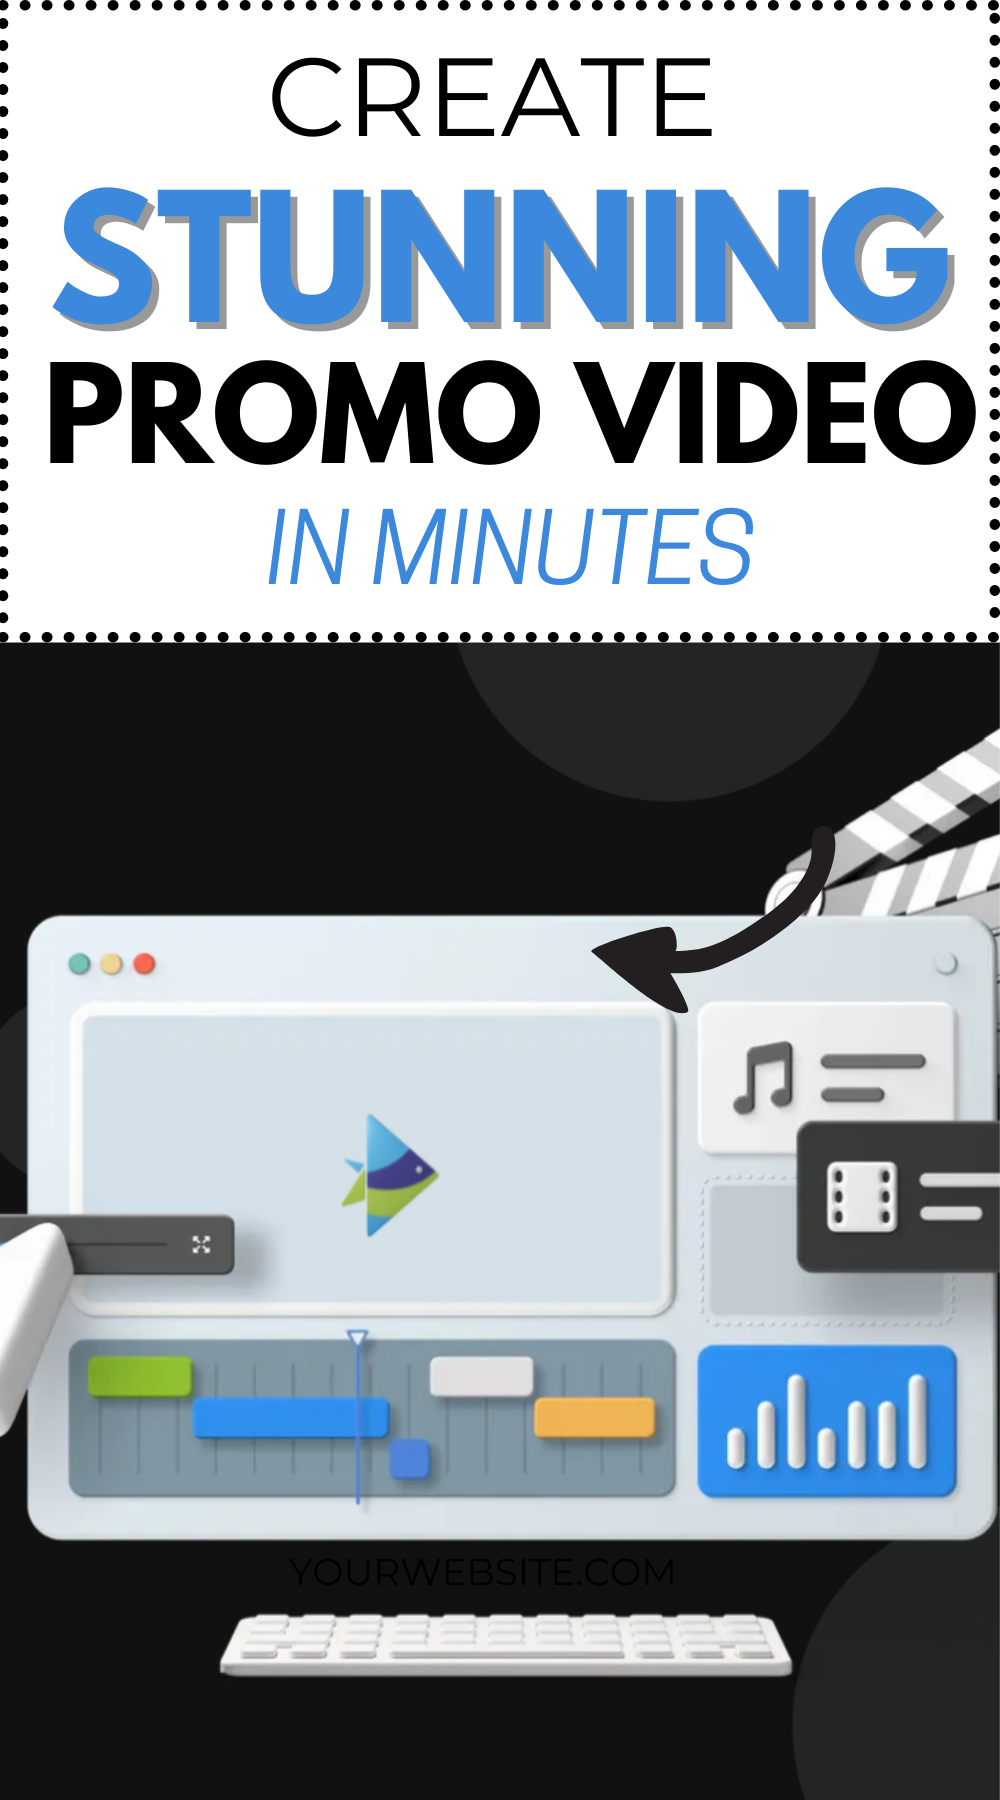 Create stunning promo video in minutes